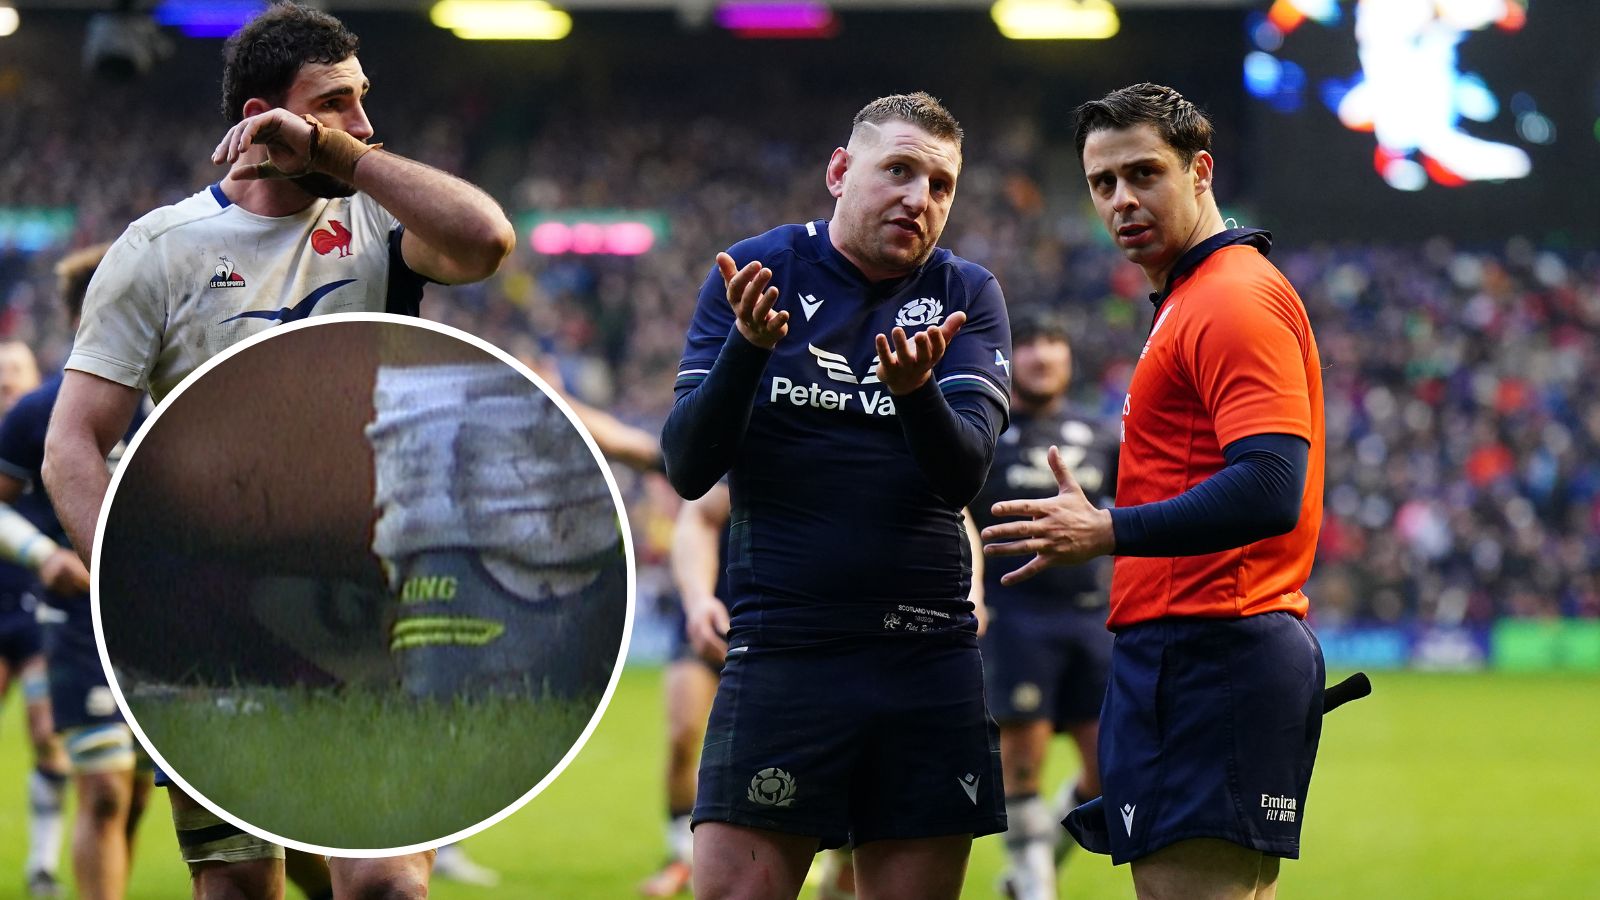 world rugby have ‘no plans’ to meet scotland’s apology demands